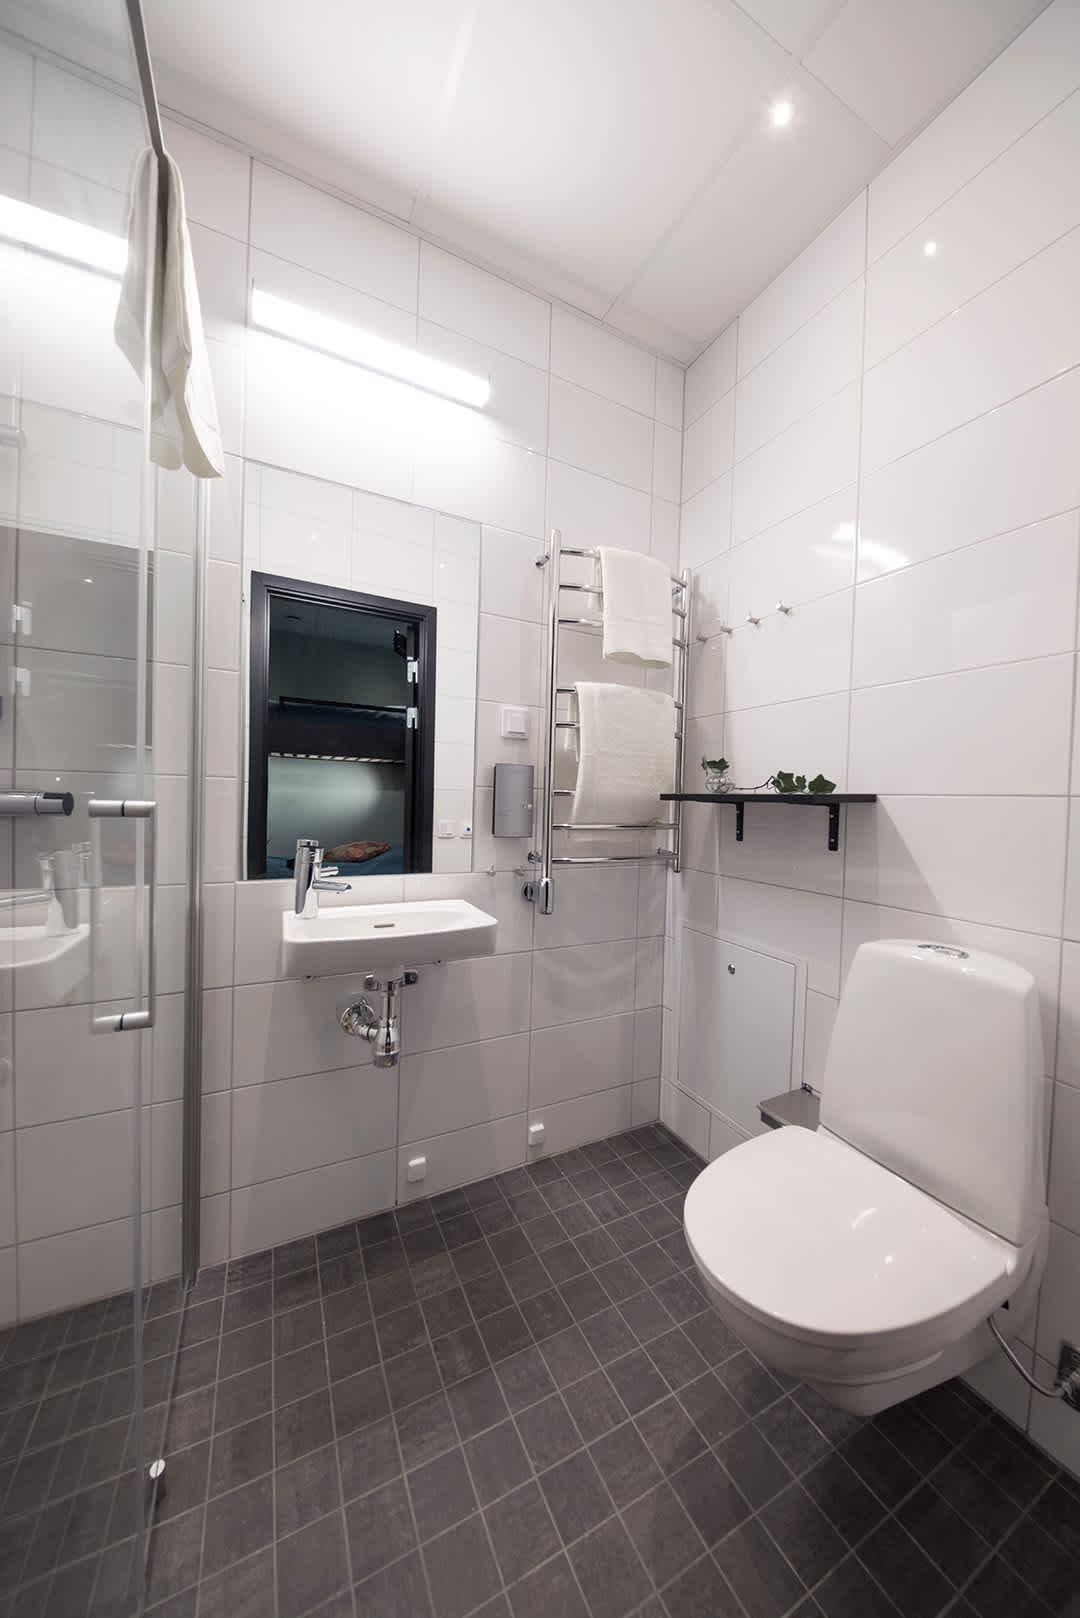 Room Carma at Staykvick Boutique Hostel. A spacious bathroom with a shower and a toilet.